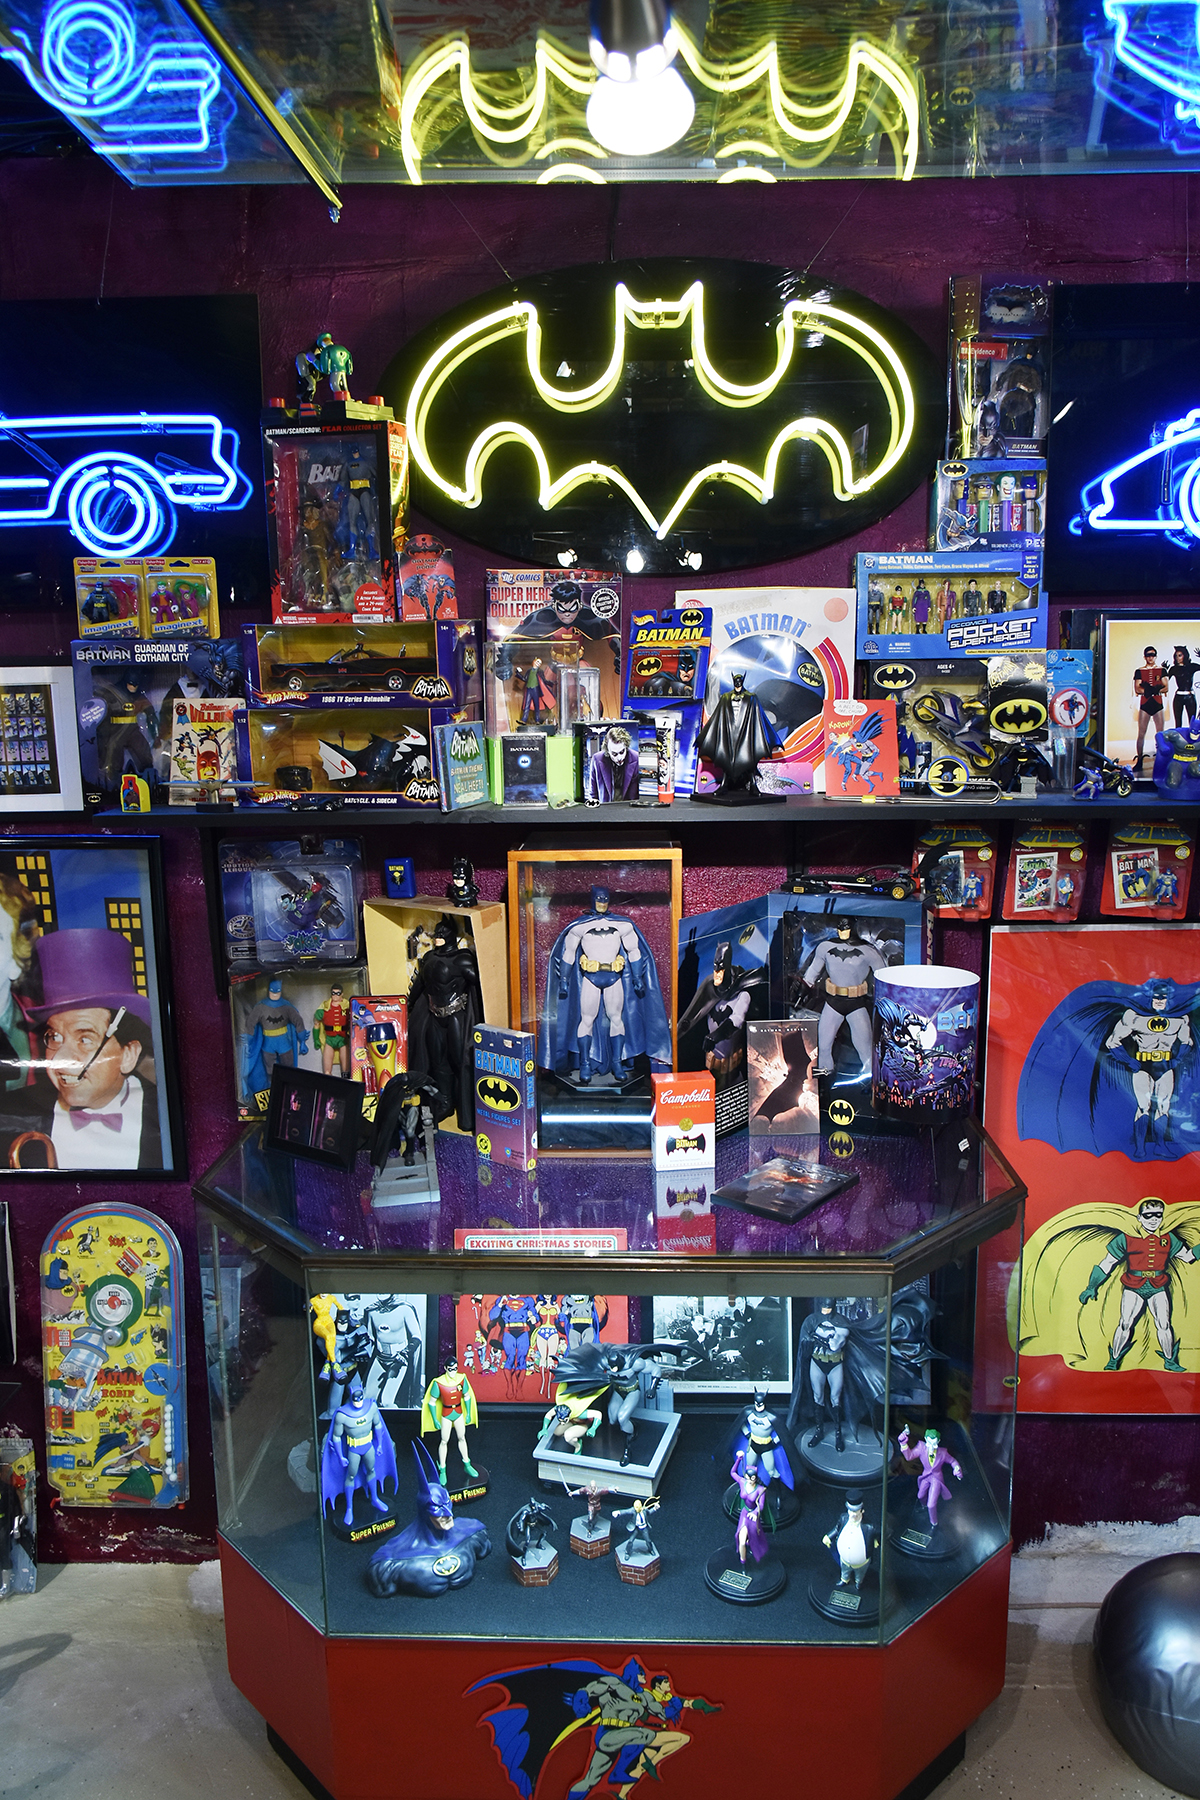 Batman dolls and neon signs make up a small part of the 3,250 piece collection acquired by The Children's Museum of Indianapolis.